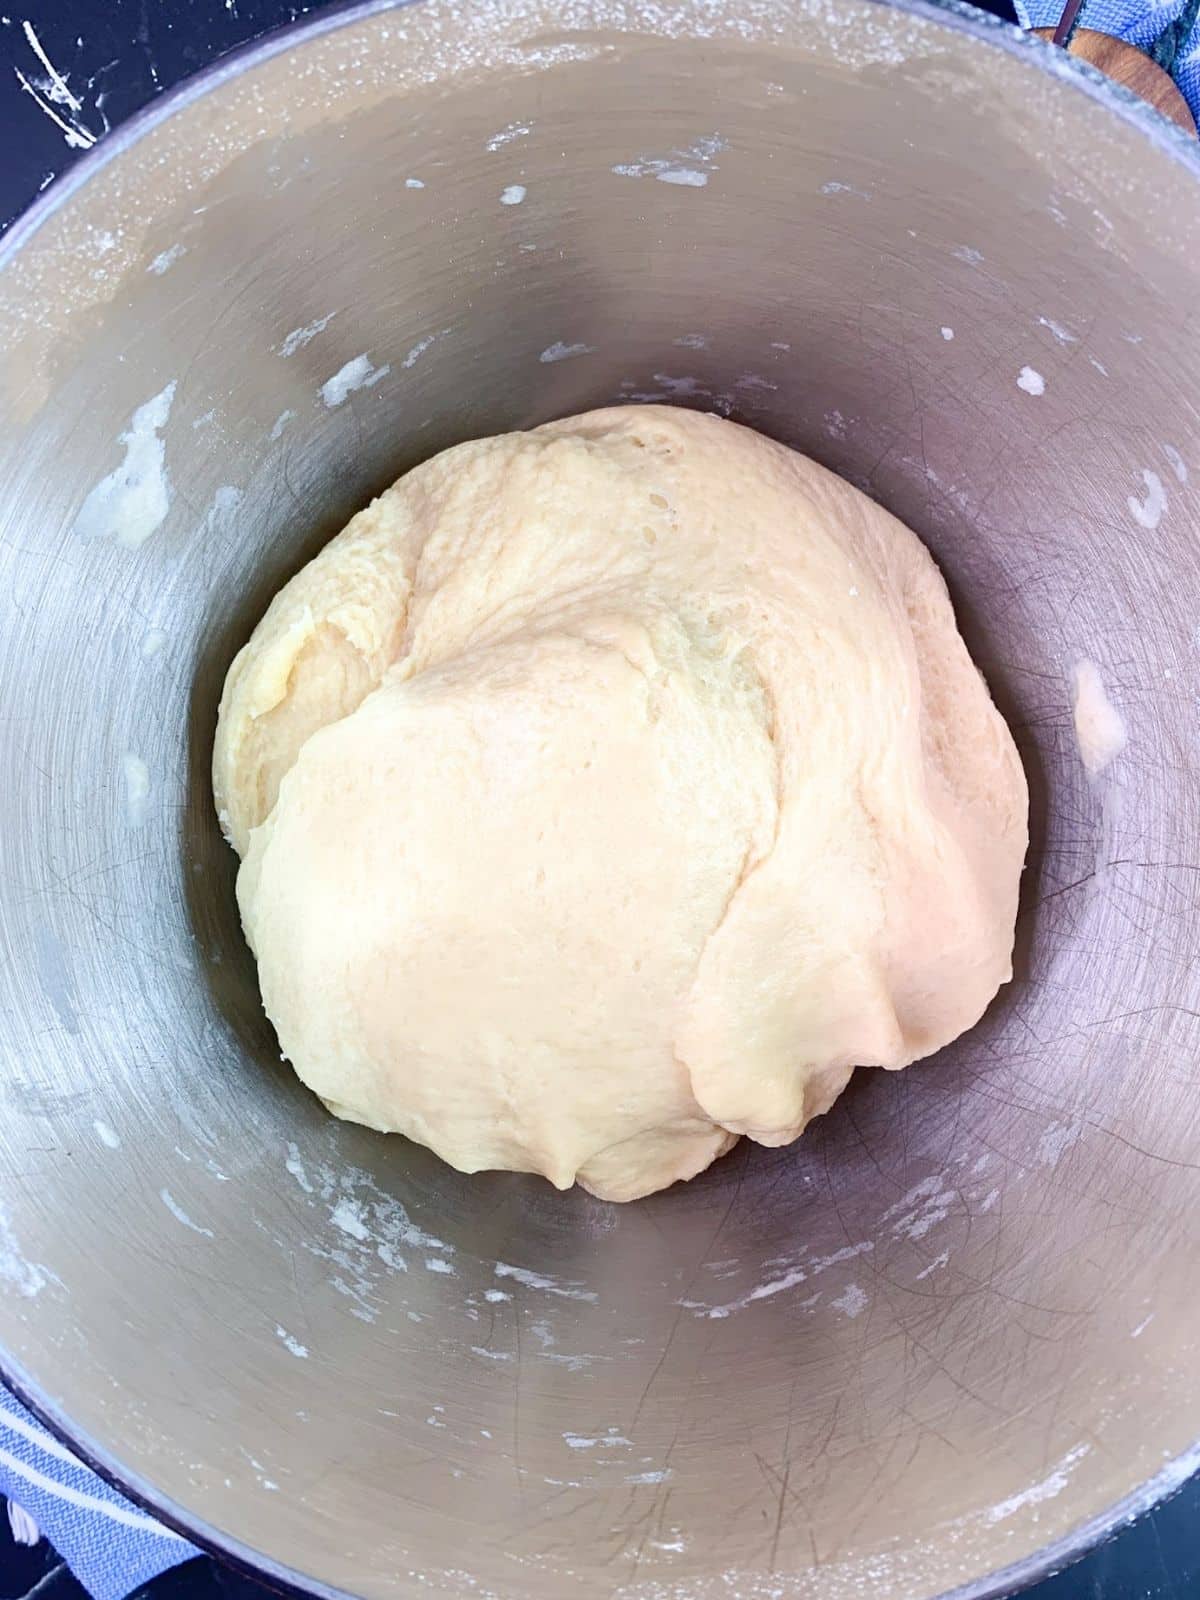 Bread dough before kneading in mixing bowl.